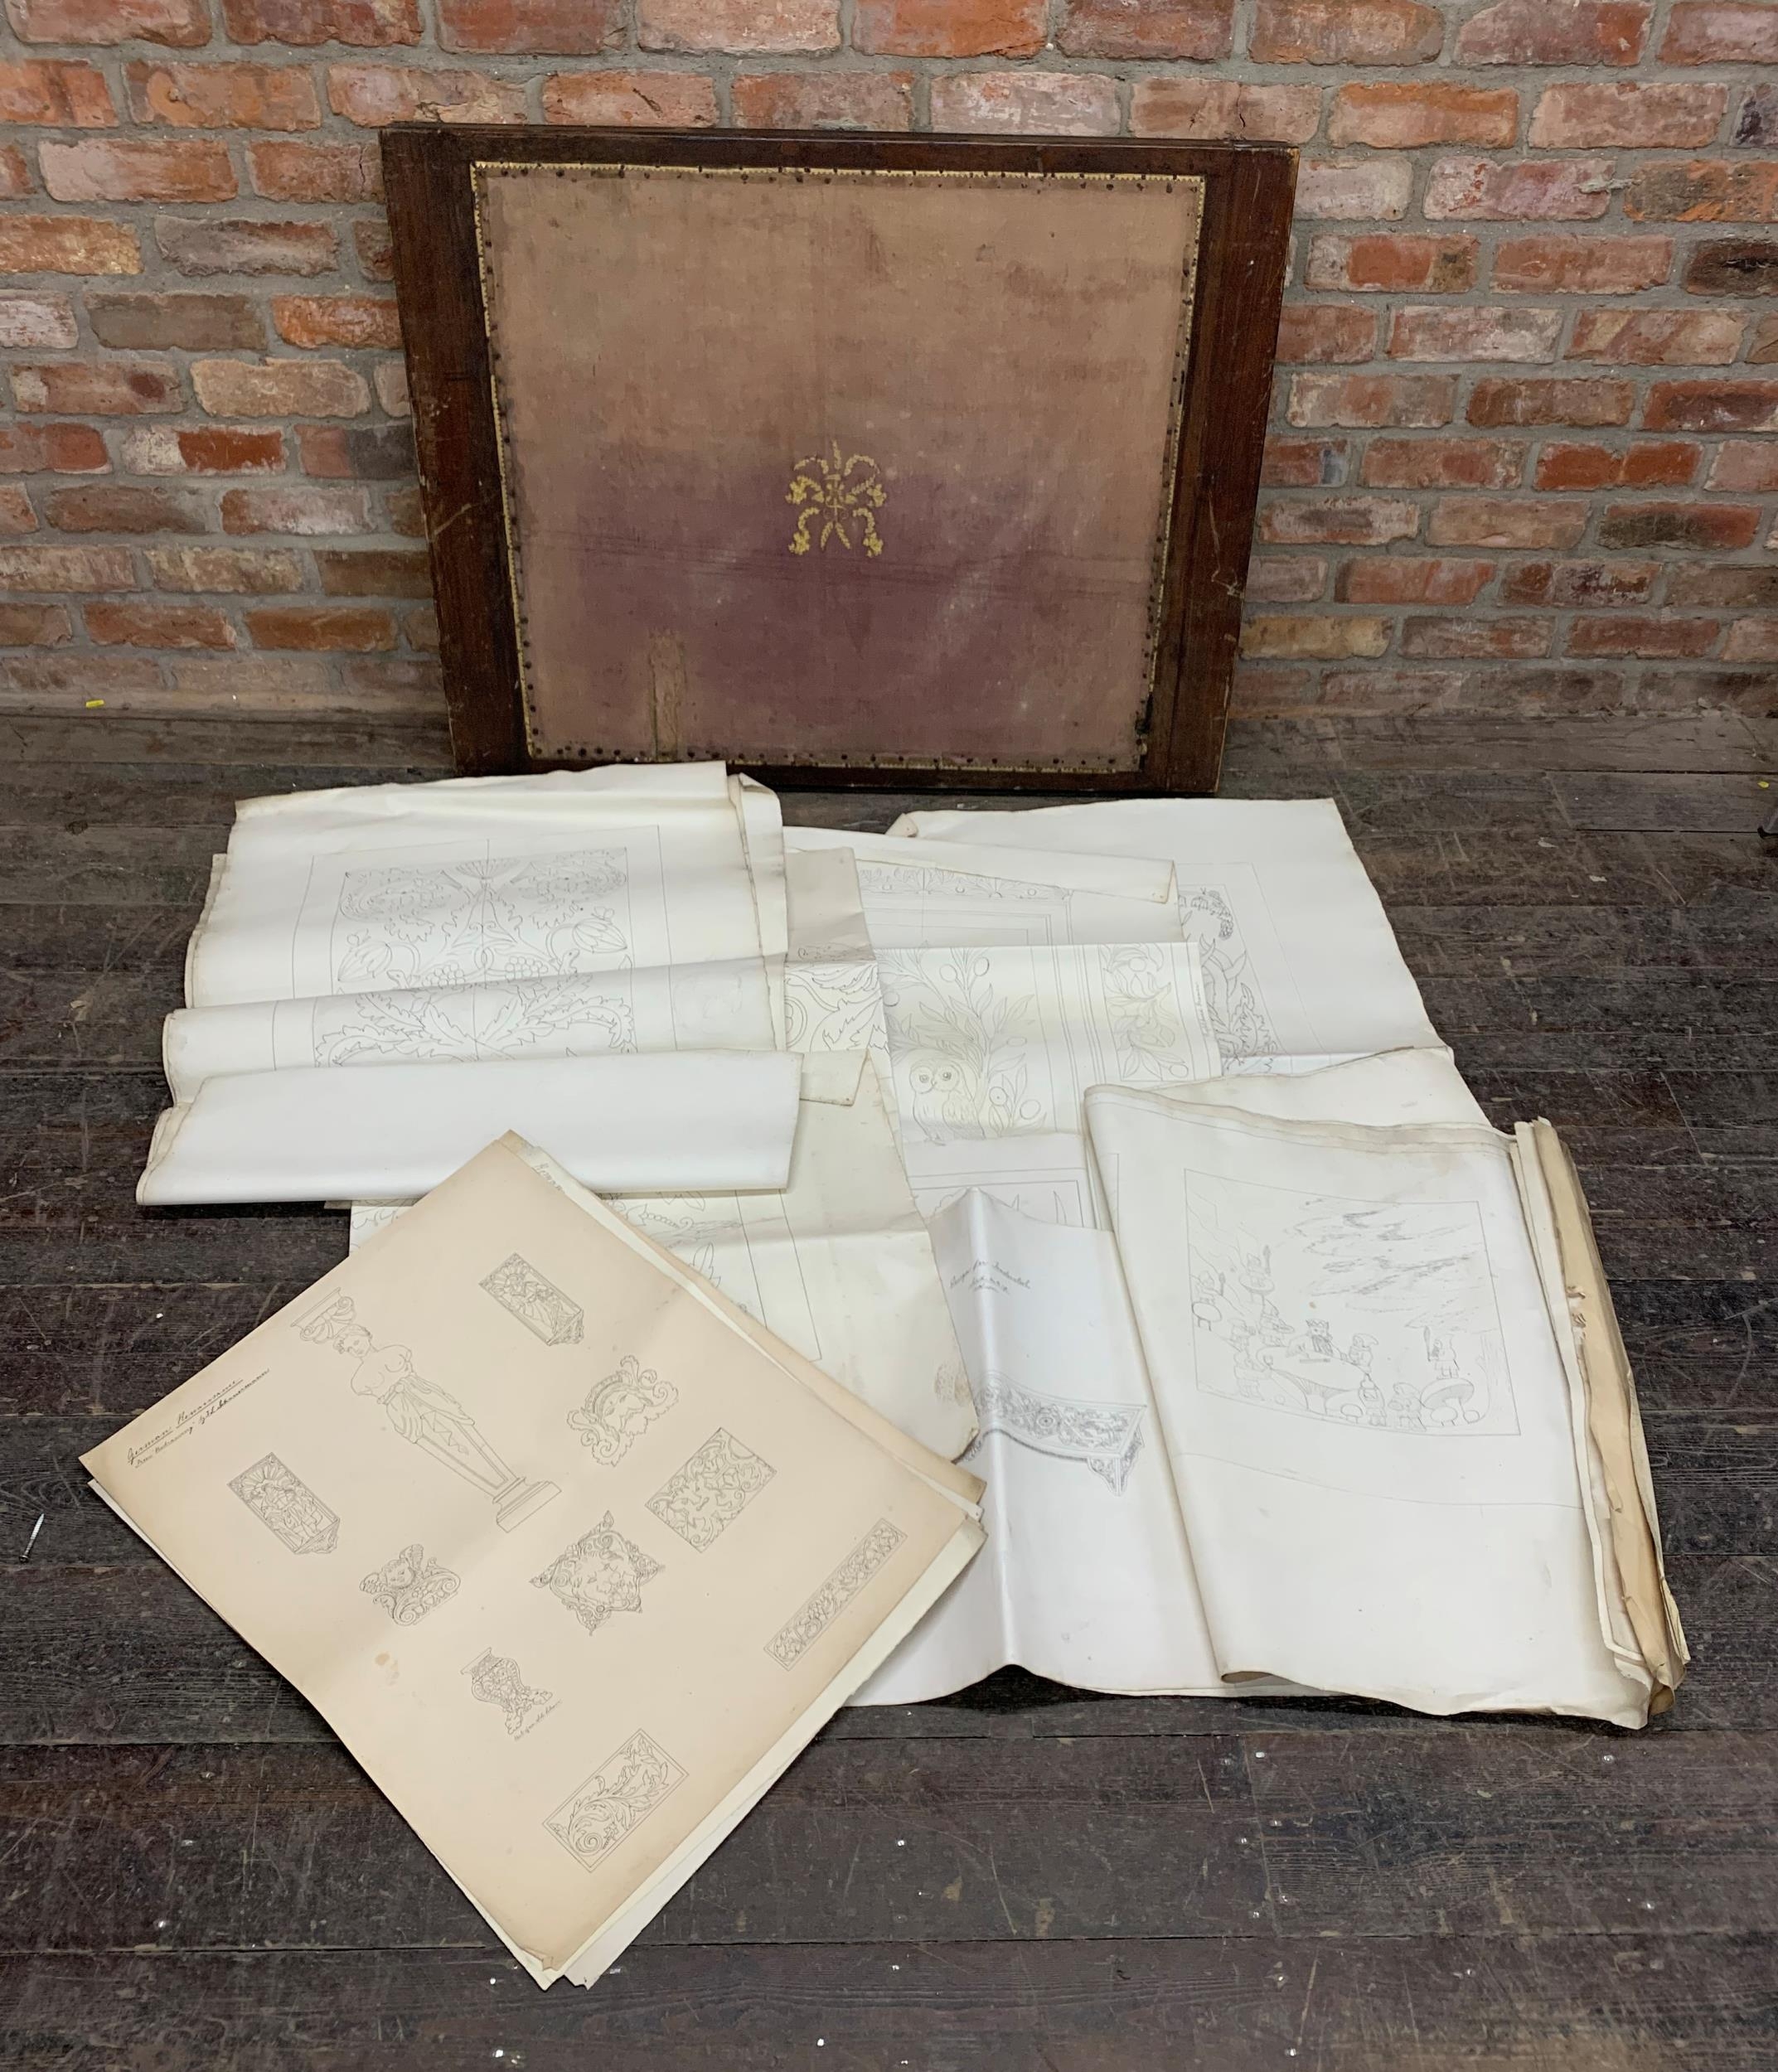 Large collection of original Arts & Crafts sketch drawings of furniture and panel designs, held in